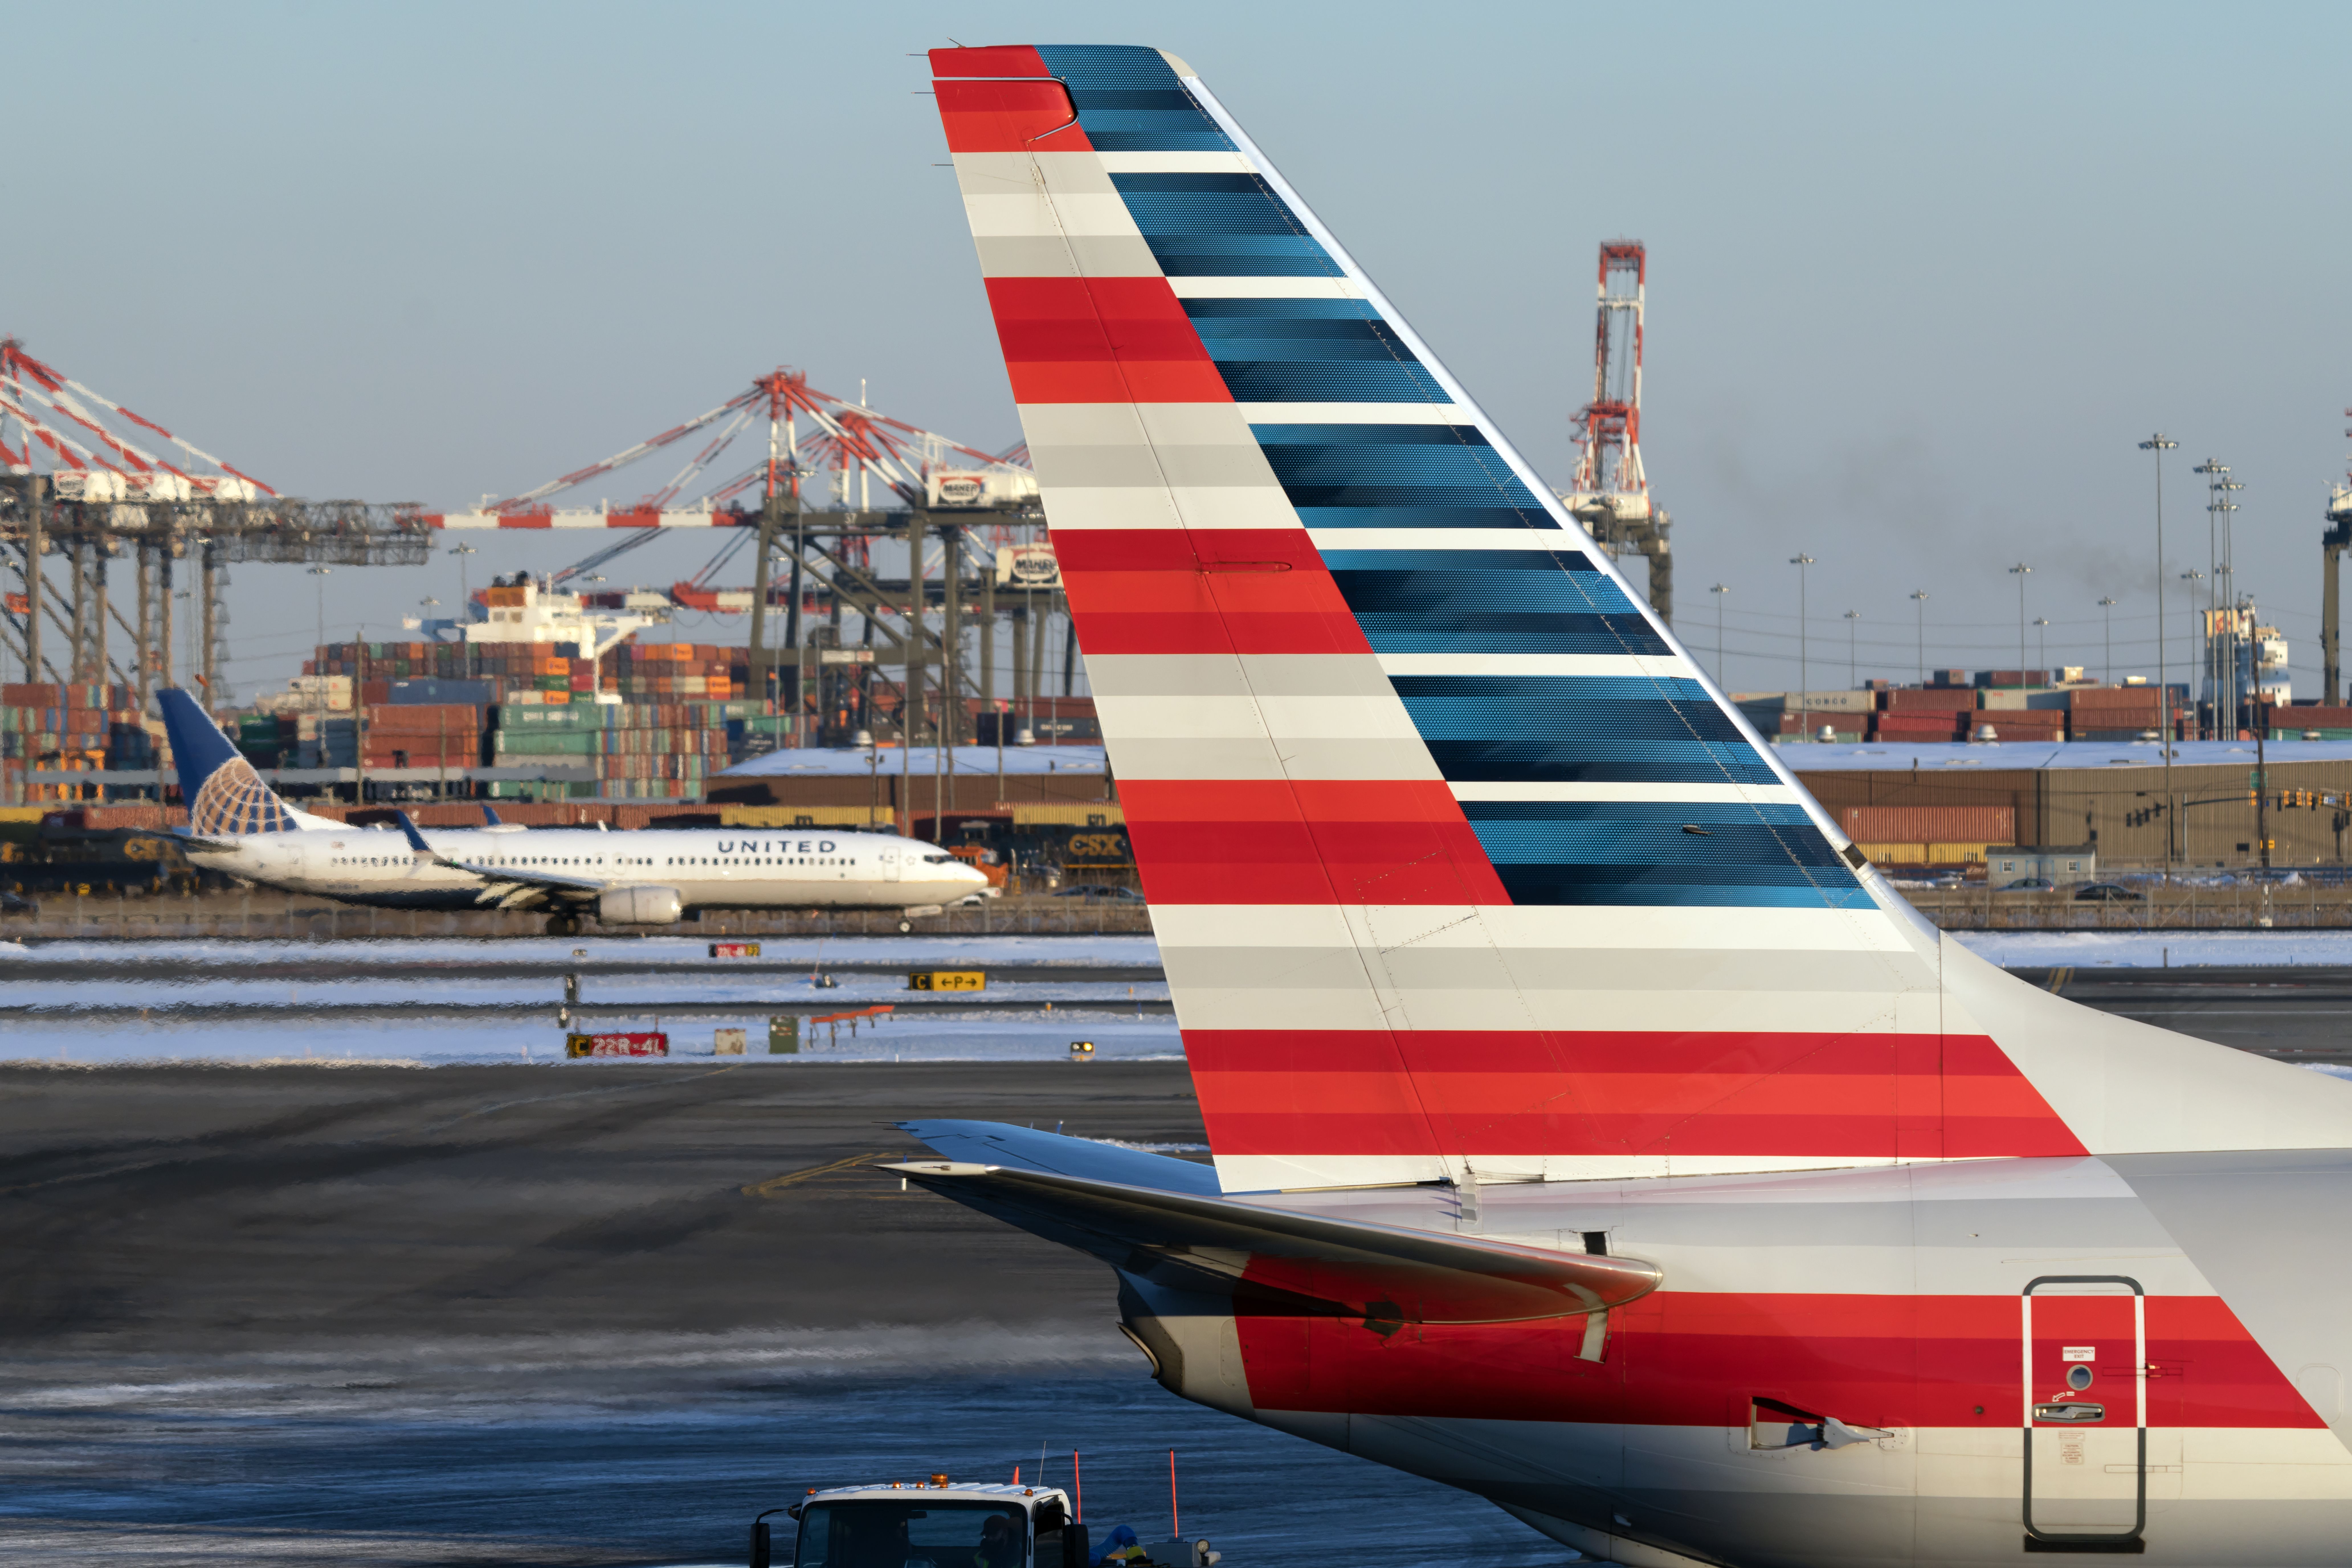 American Airlines Tail (1)